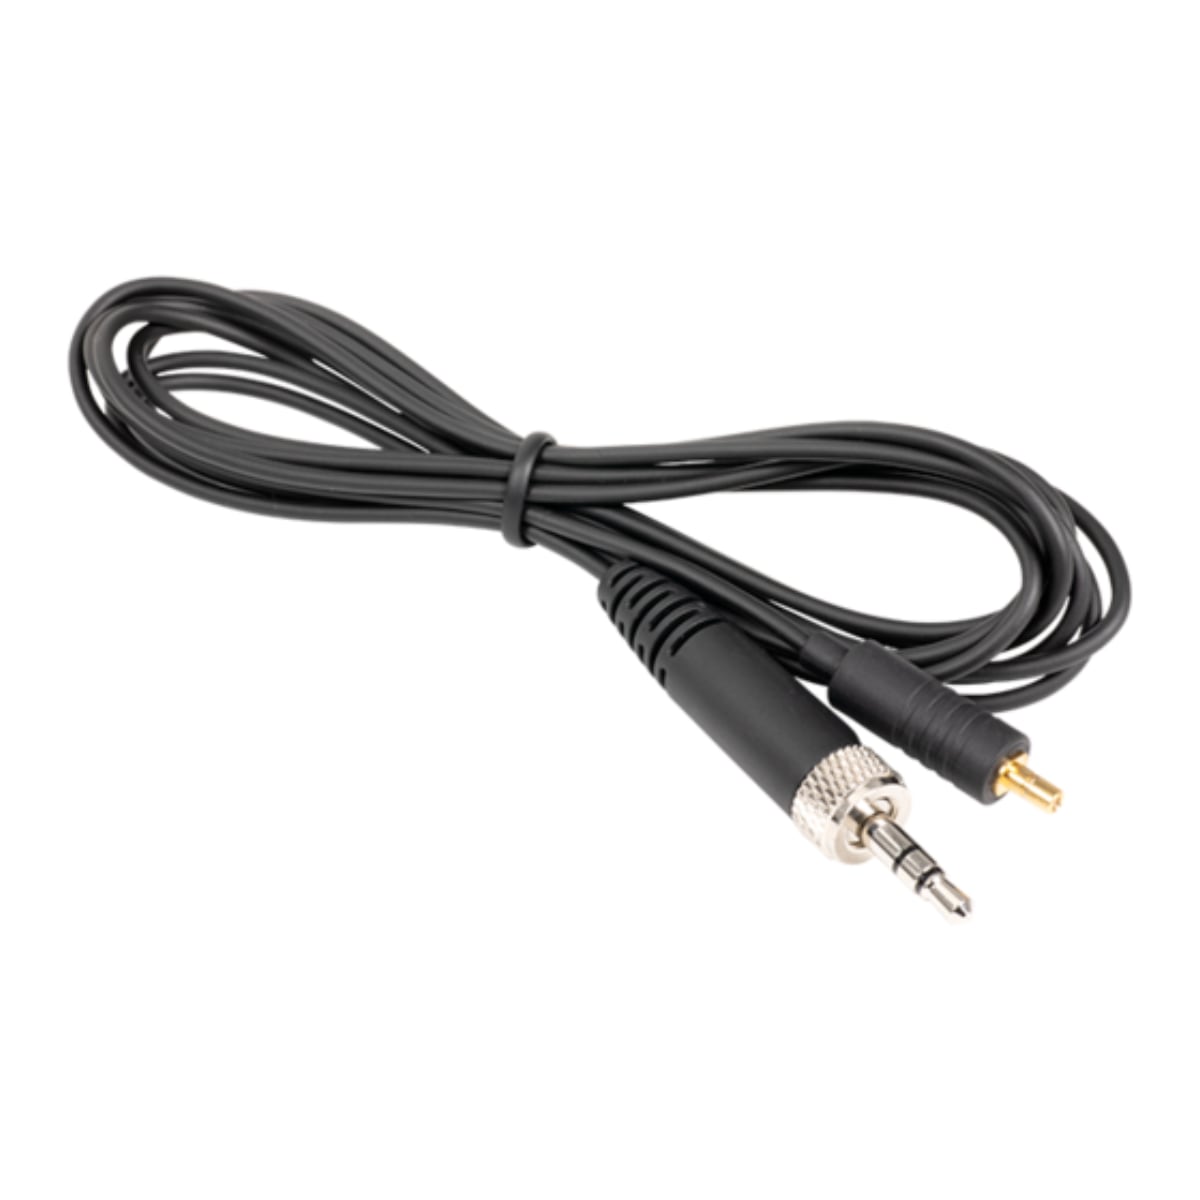 Neumann AC 31 Connection cable for the Miniature Clip Mic system, 1.8 m, to 3.5 mm jack